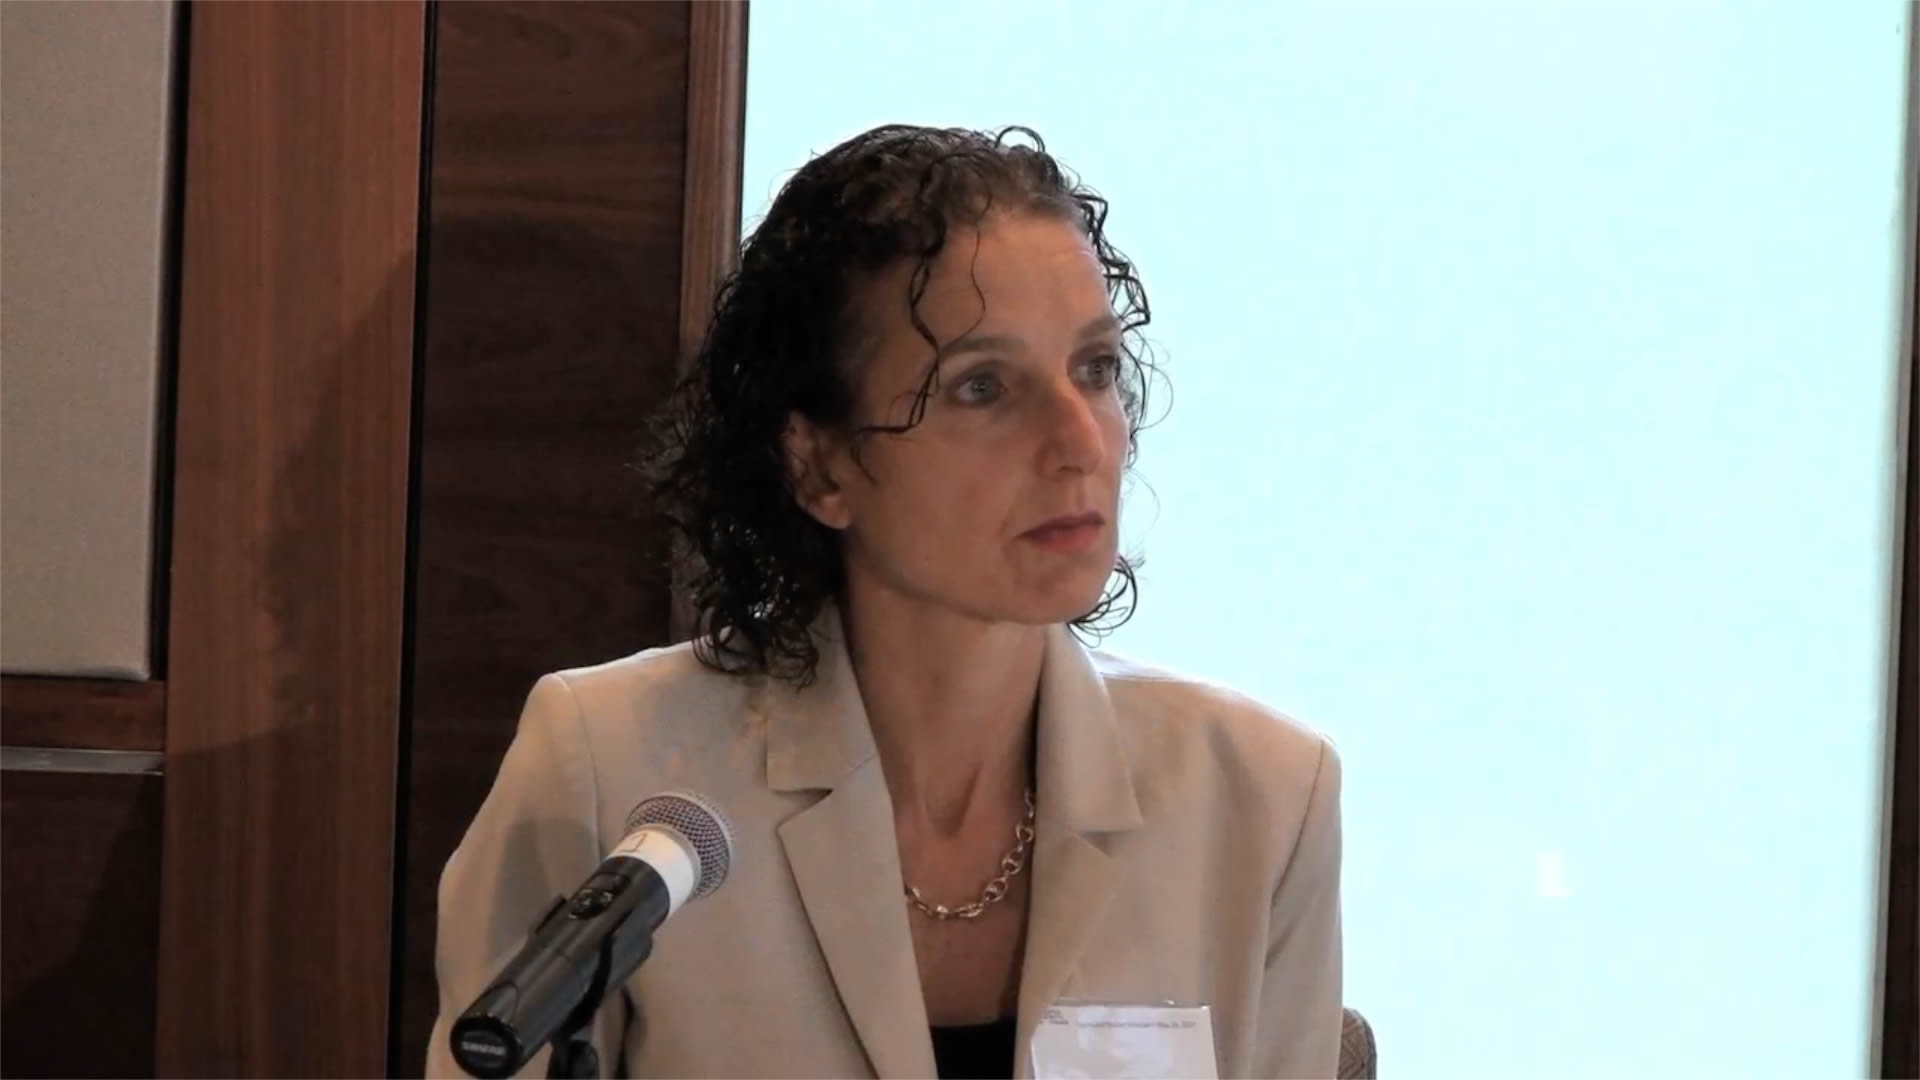 Susan Stamm, Office of the Childrens Lawyer